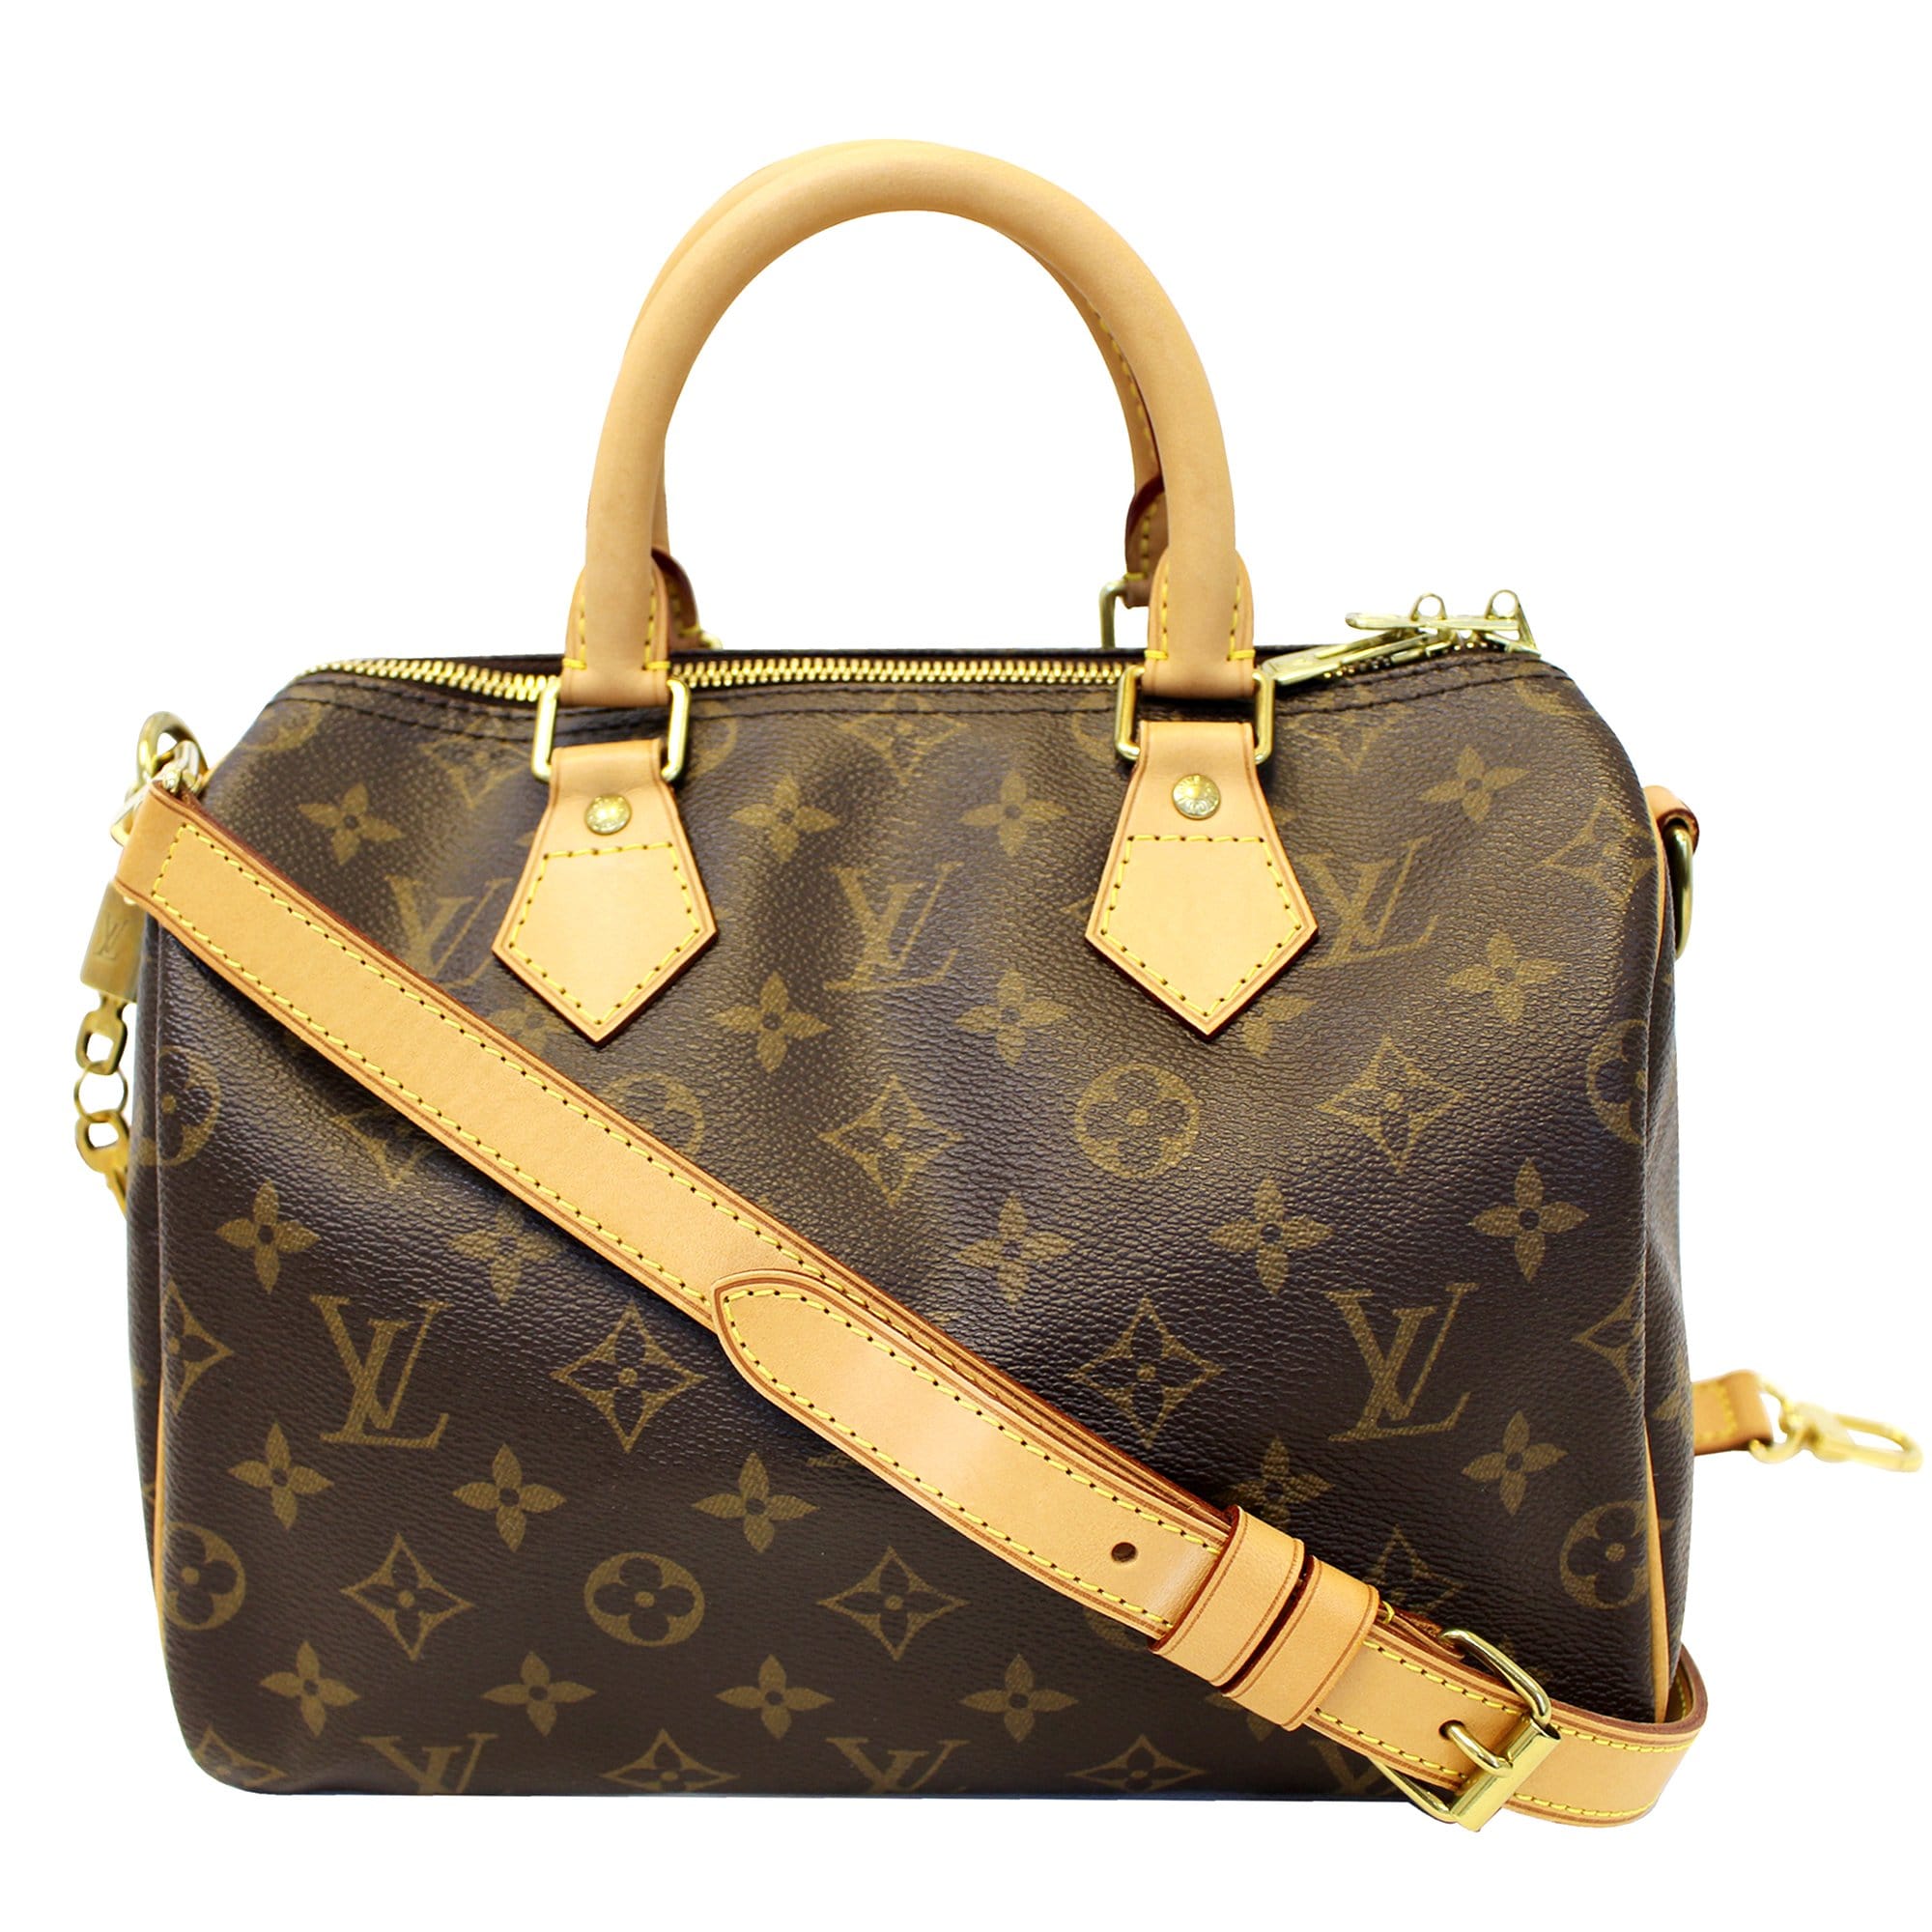 Brand New Authentic Louis Vuitton Speedy Bandouliere 25 bag MUST